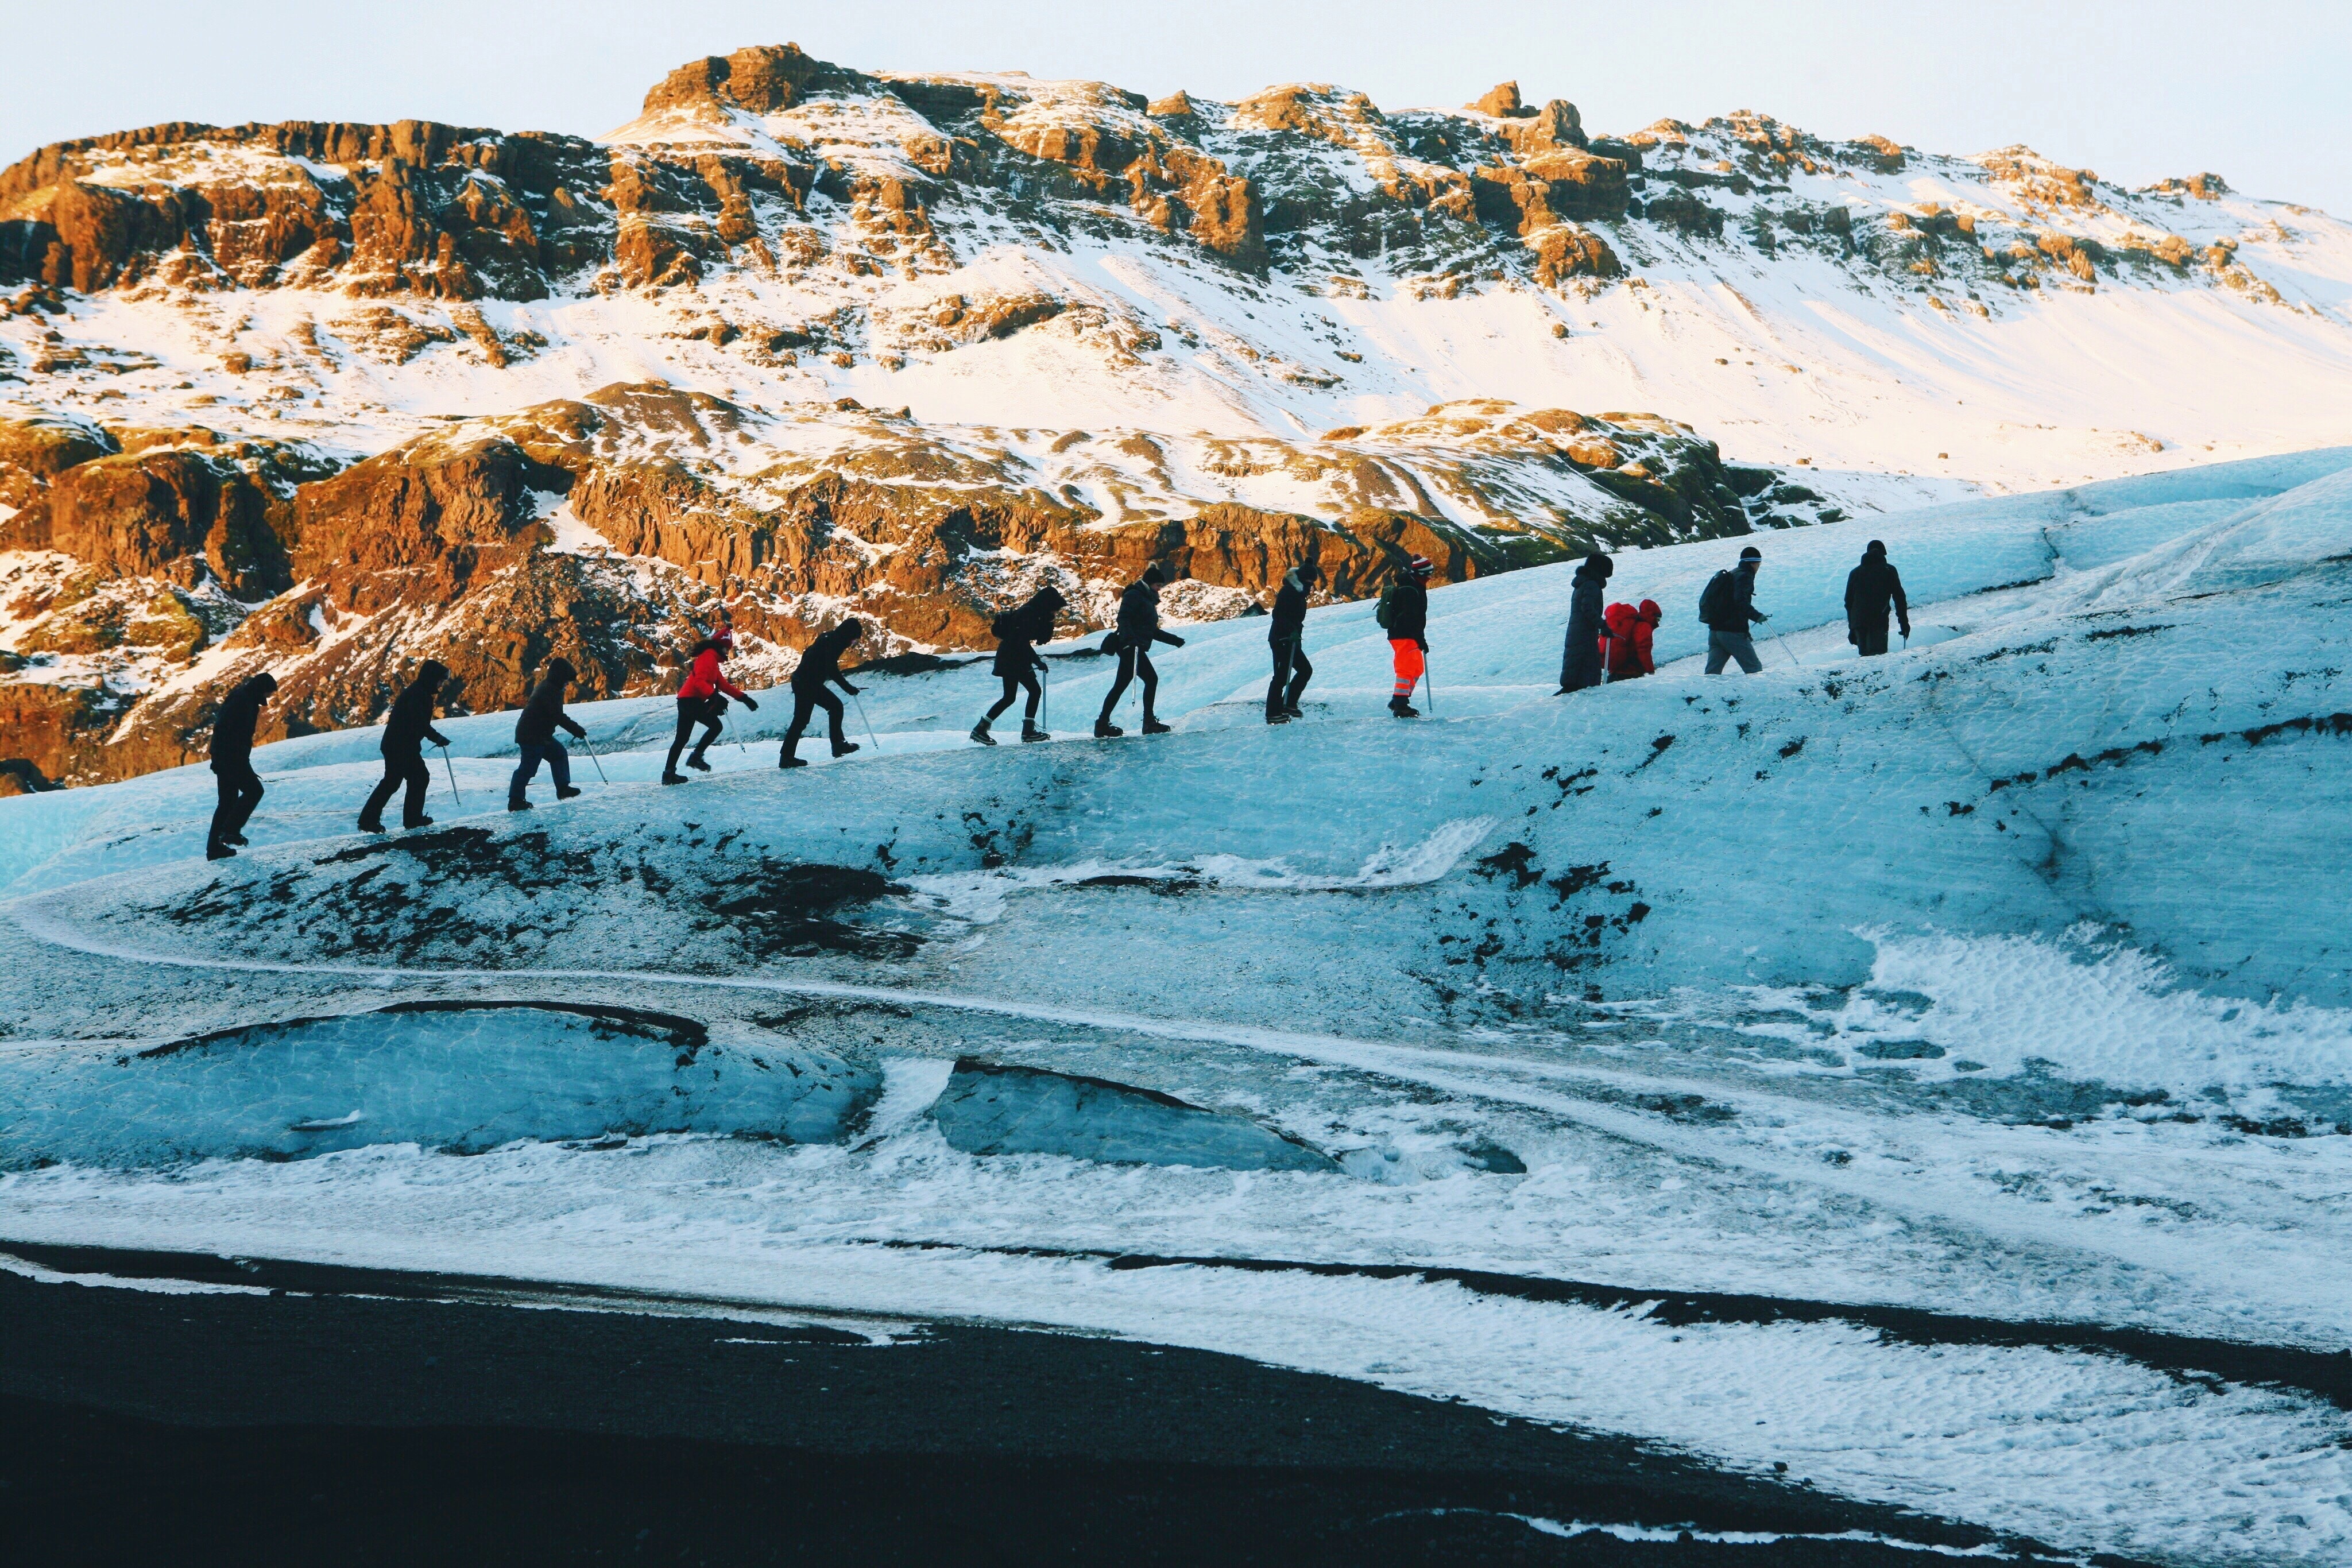 Going on a glacier hike up Iceland's largest ice cap Vatnajökull is a fun and memorable experience.